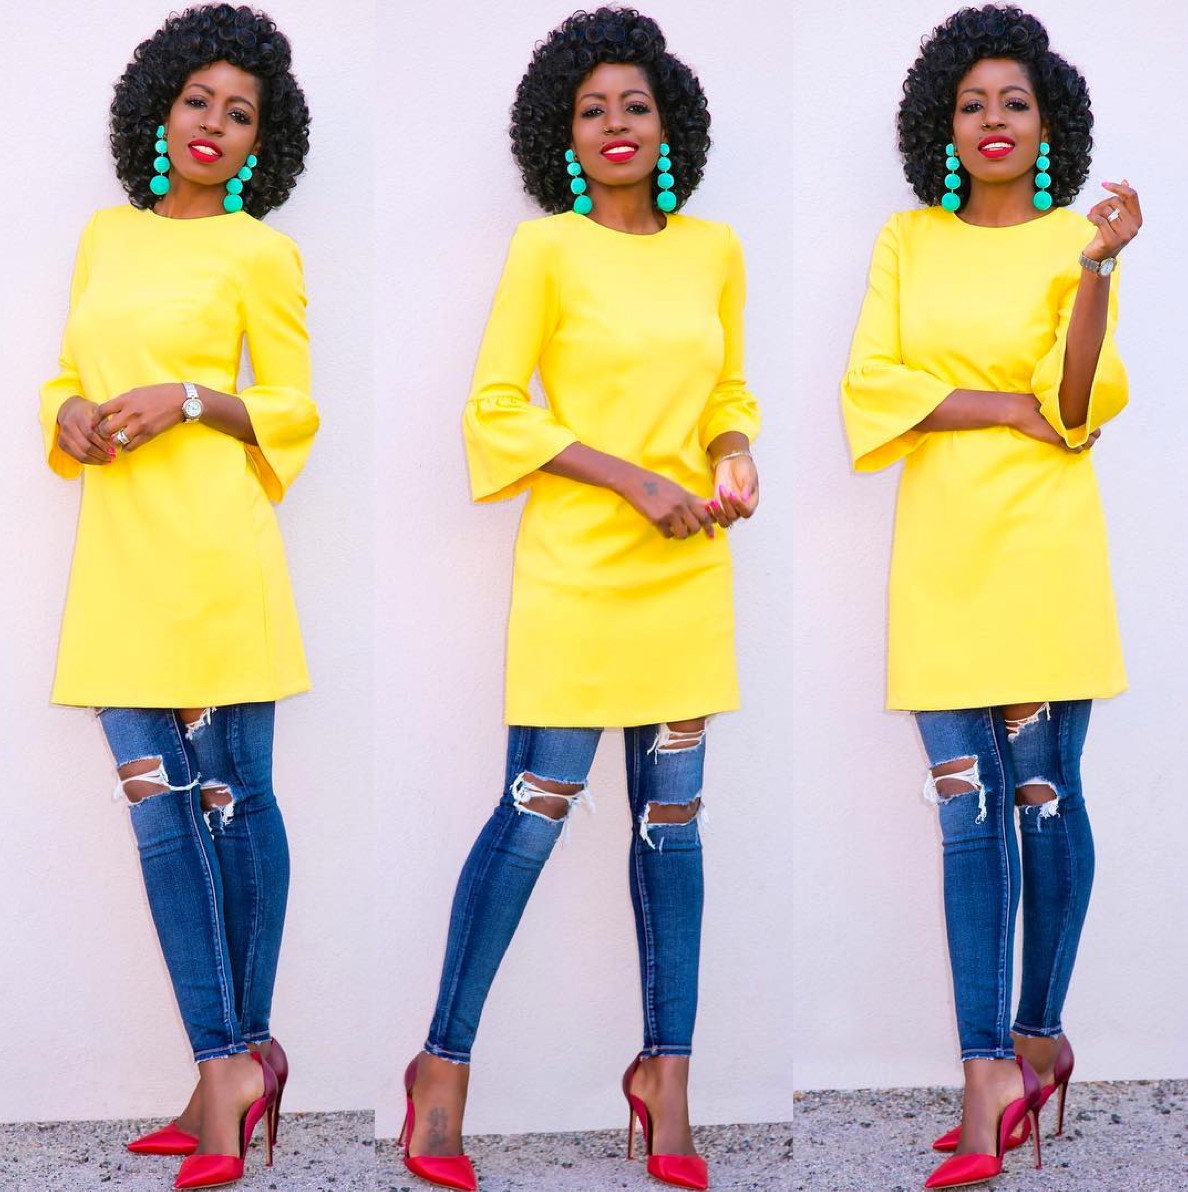 Black Fashion Bloggers Show Us How To Remix Spring’s Hottest Trends